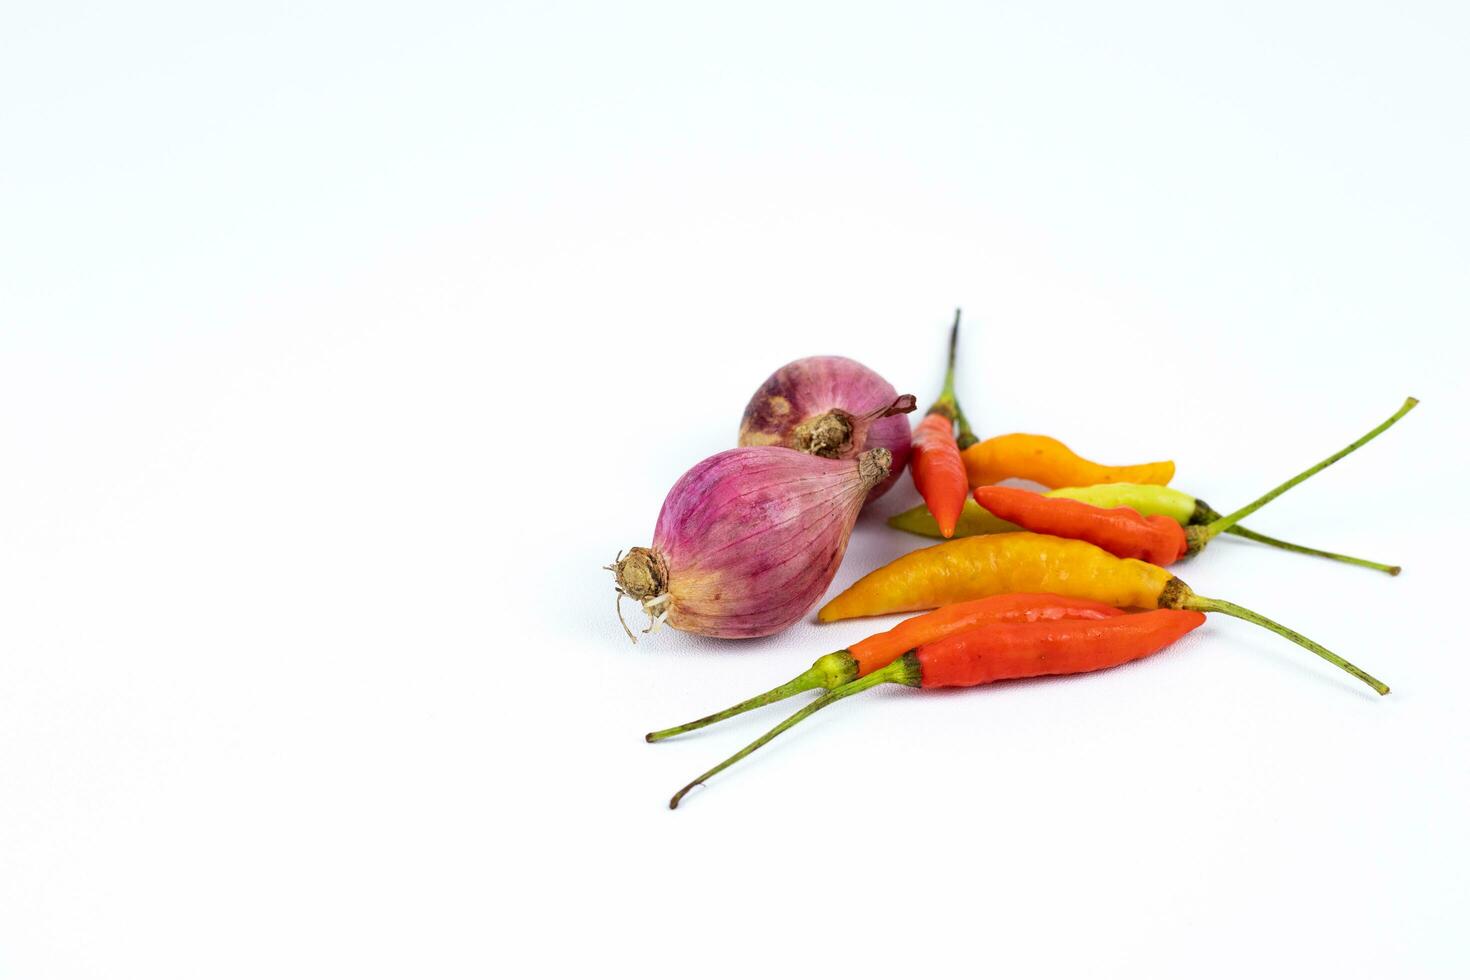 chili,curly chili, Onion garlic, and shallots isolated on a white background photo